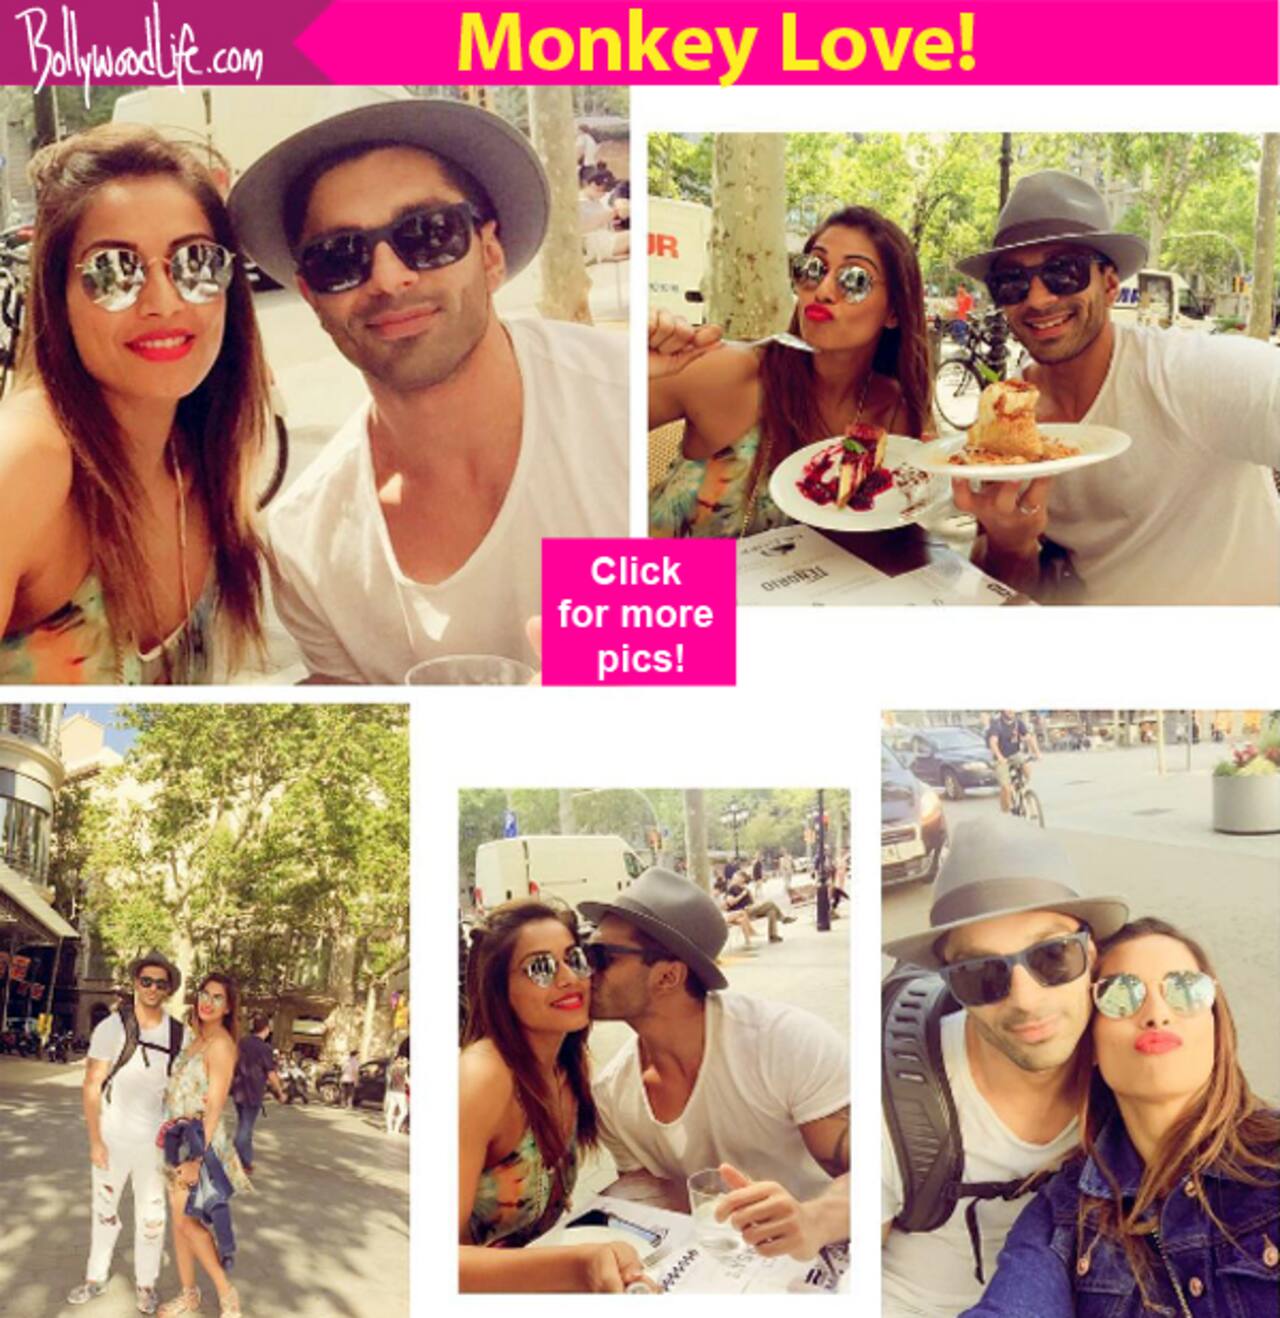 Bipasha Basu and Karan Singh Grover's Spain holiday is nothing short of a PDA fest - view pics!